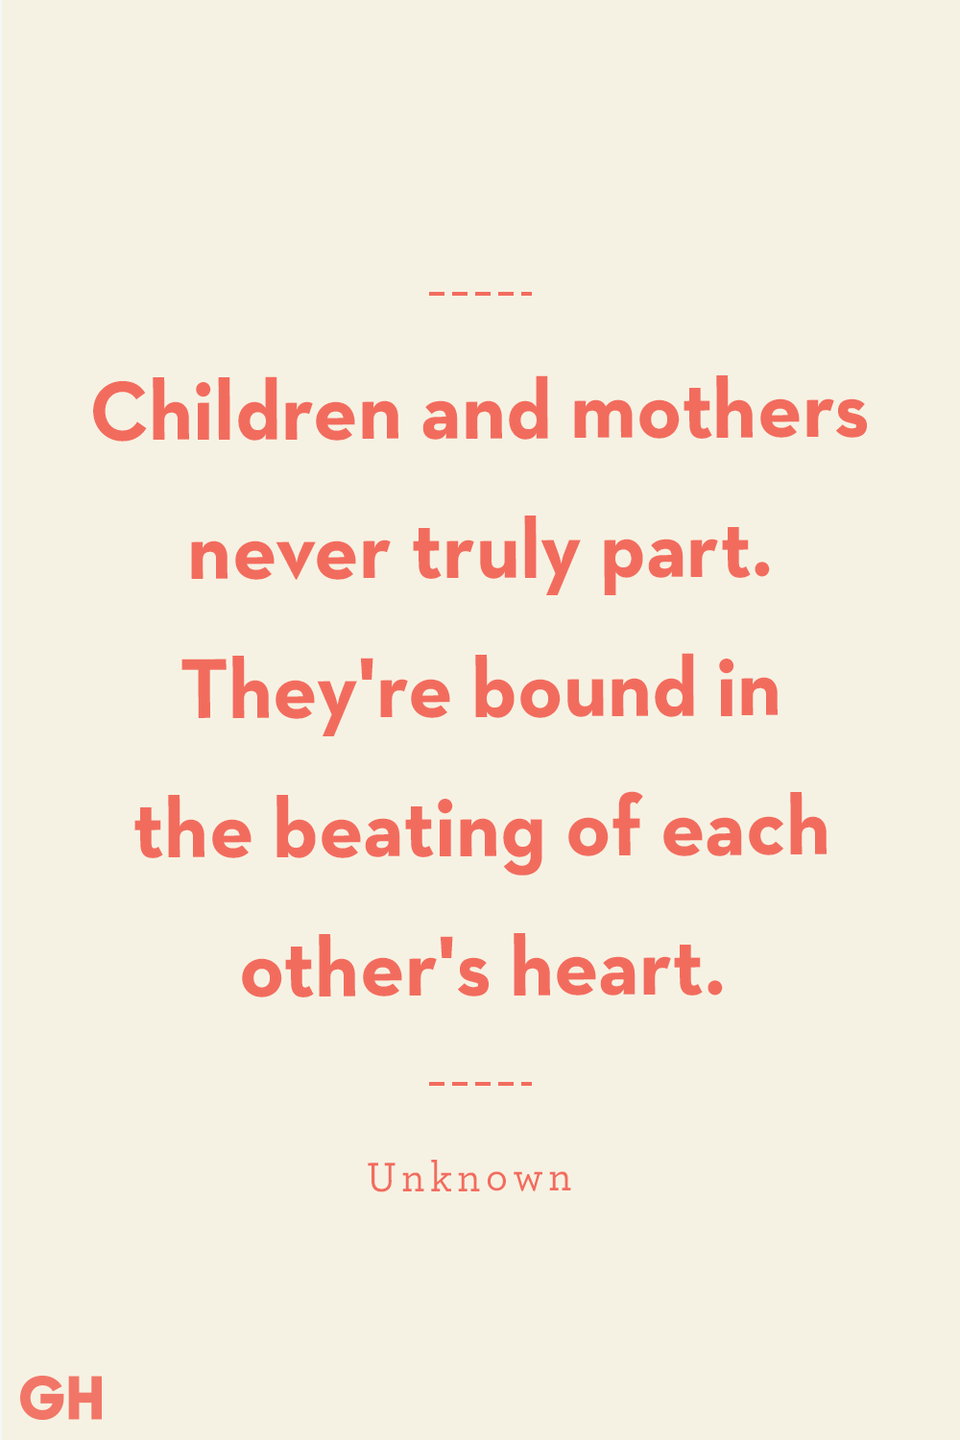 <p>Children and mothers never truly part. They're bound in the beating of each other's heart.</p>